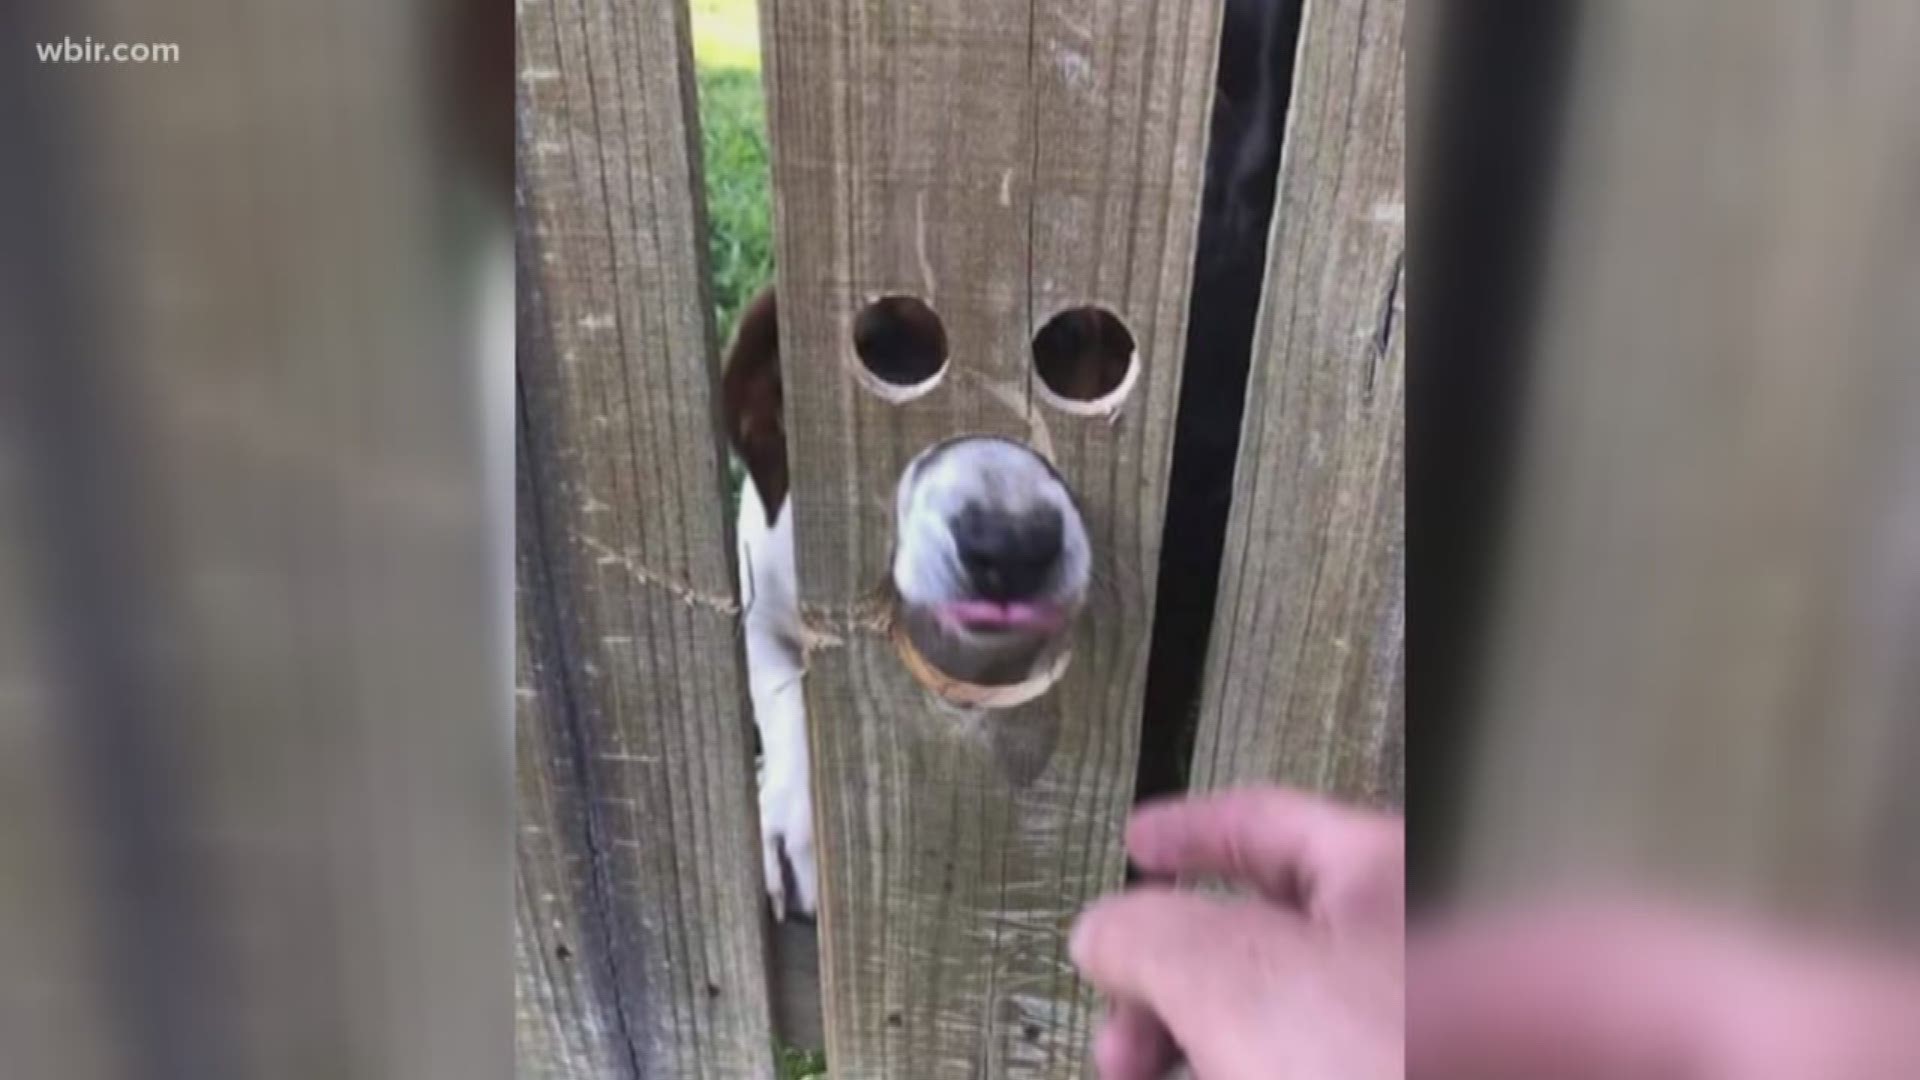 This photo of Gracie the dog peeping through her backyard fence just goes to show how important it is to make our four-legged best friends happy!!